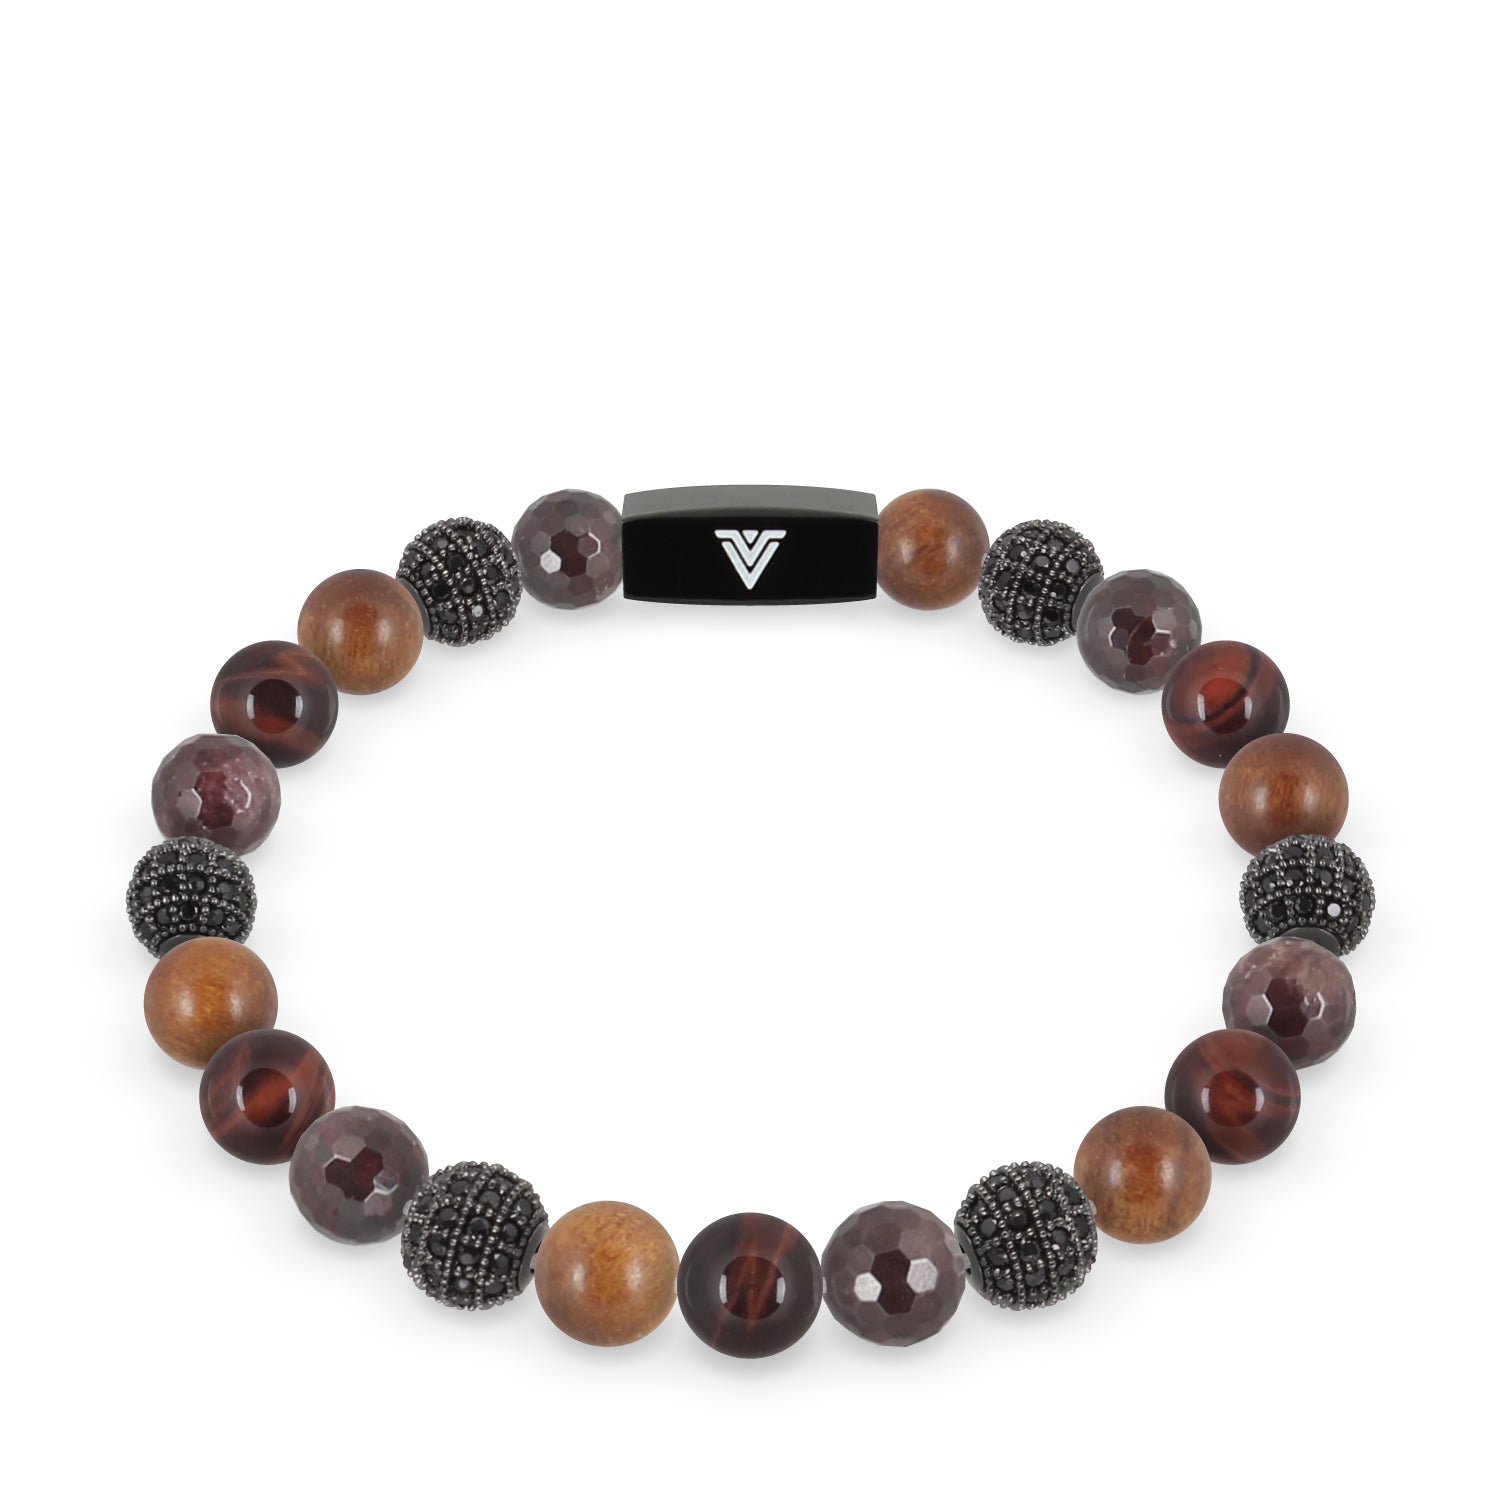 Front view of an 8mm Maroon Sirius beaded stretch bracelet featuring Faceted Garnet, Black Pave, Rosewood, & Red Tiger’s Eye crystal and black stainless steel logo bead made by Voltlin